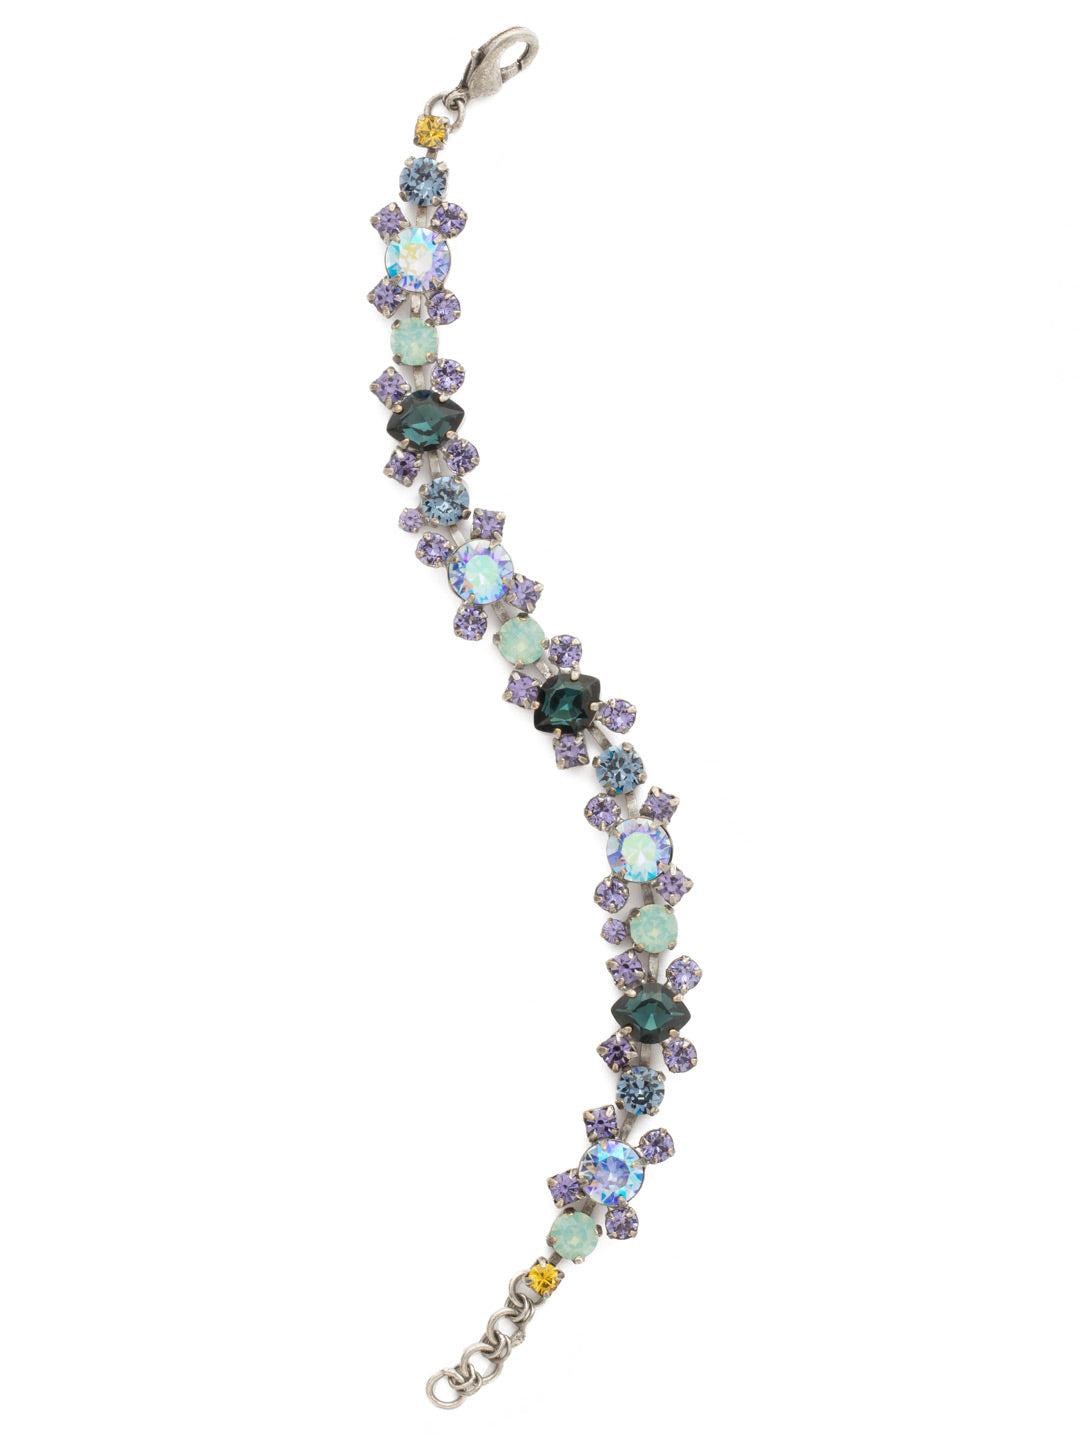 Perfect Harmony Bracelet - BDK11ASMLS - This classic bracelet features stations of crystal clusters alternating between round cut and pear shaped central stones, blending in perfect harmony!